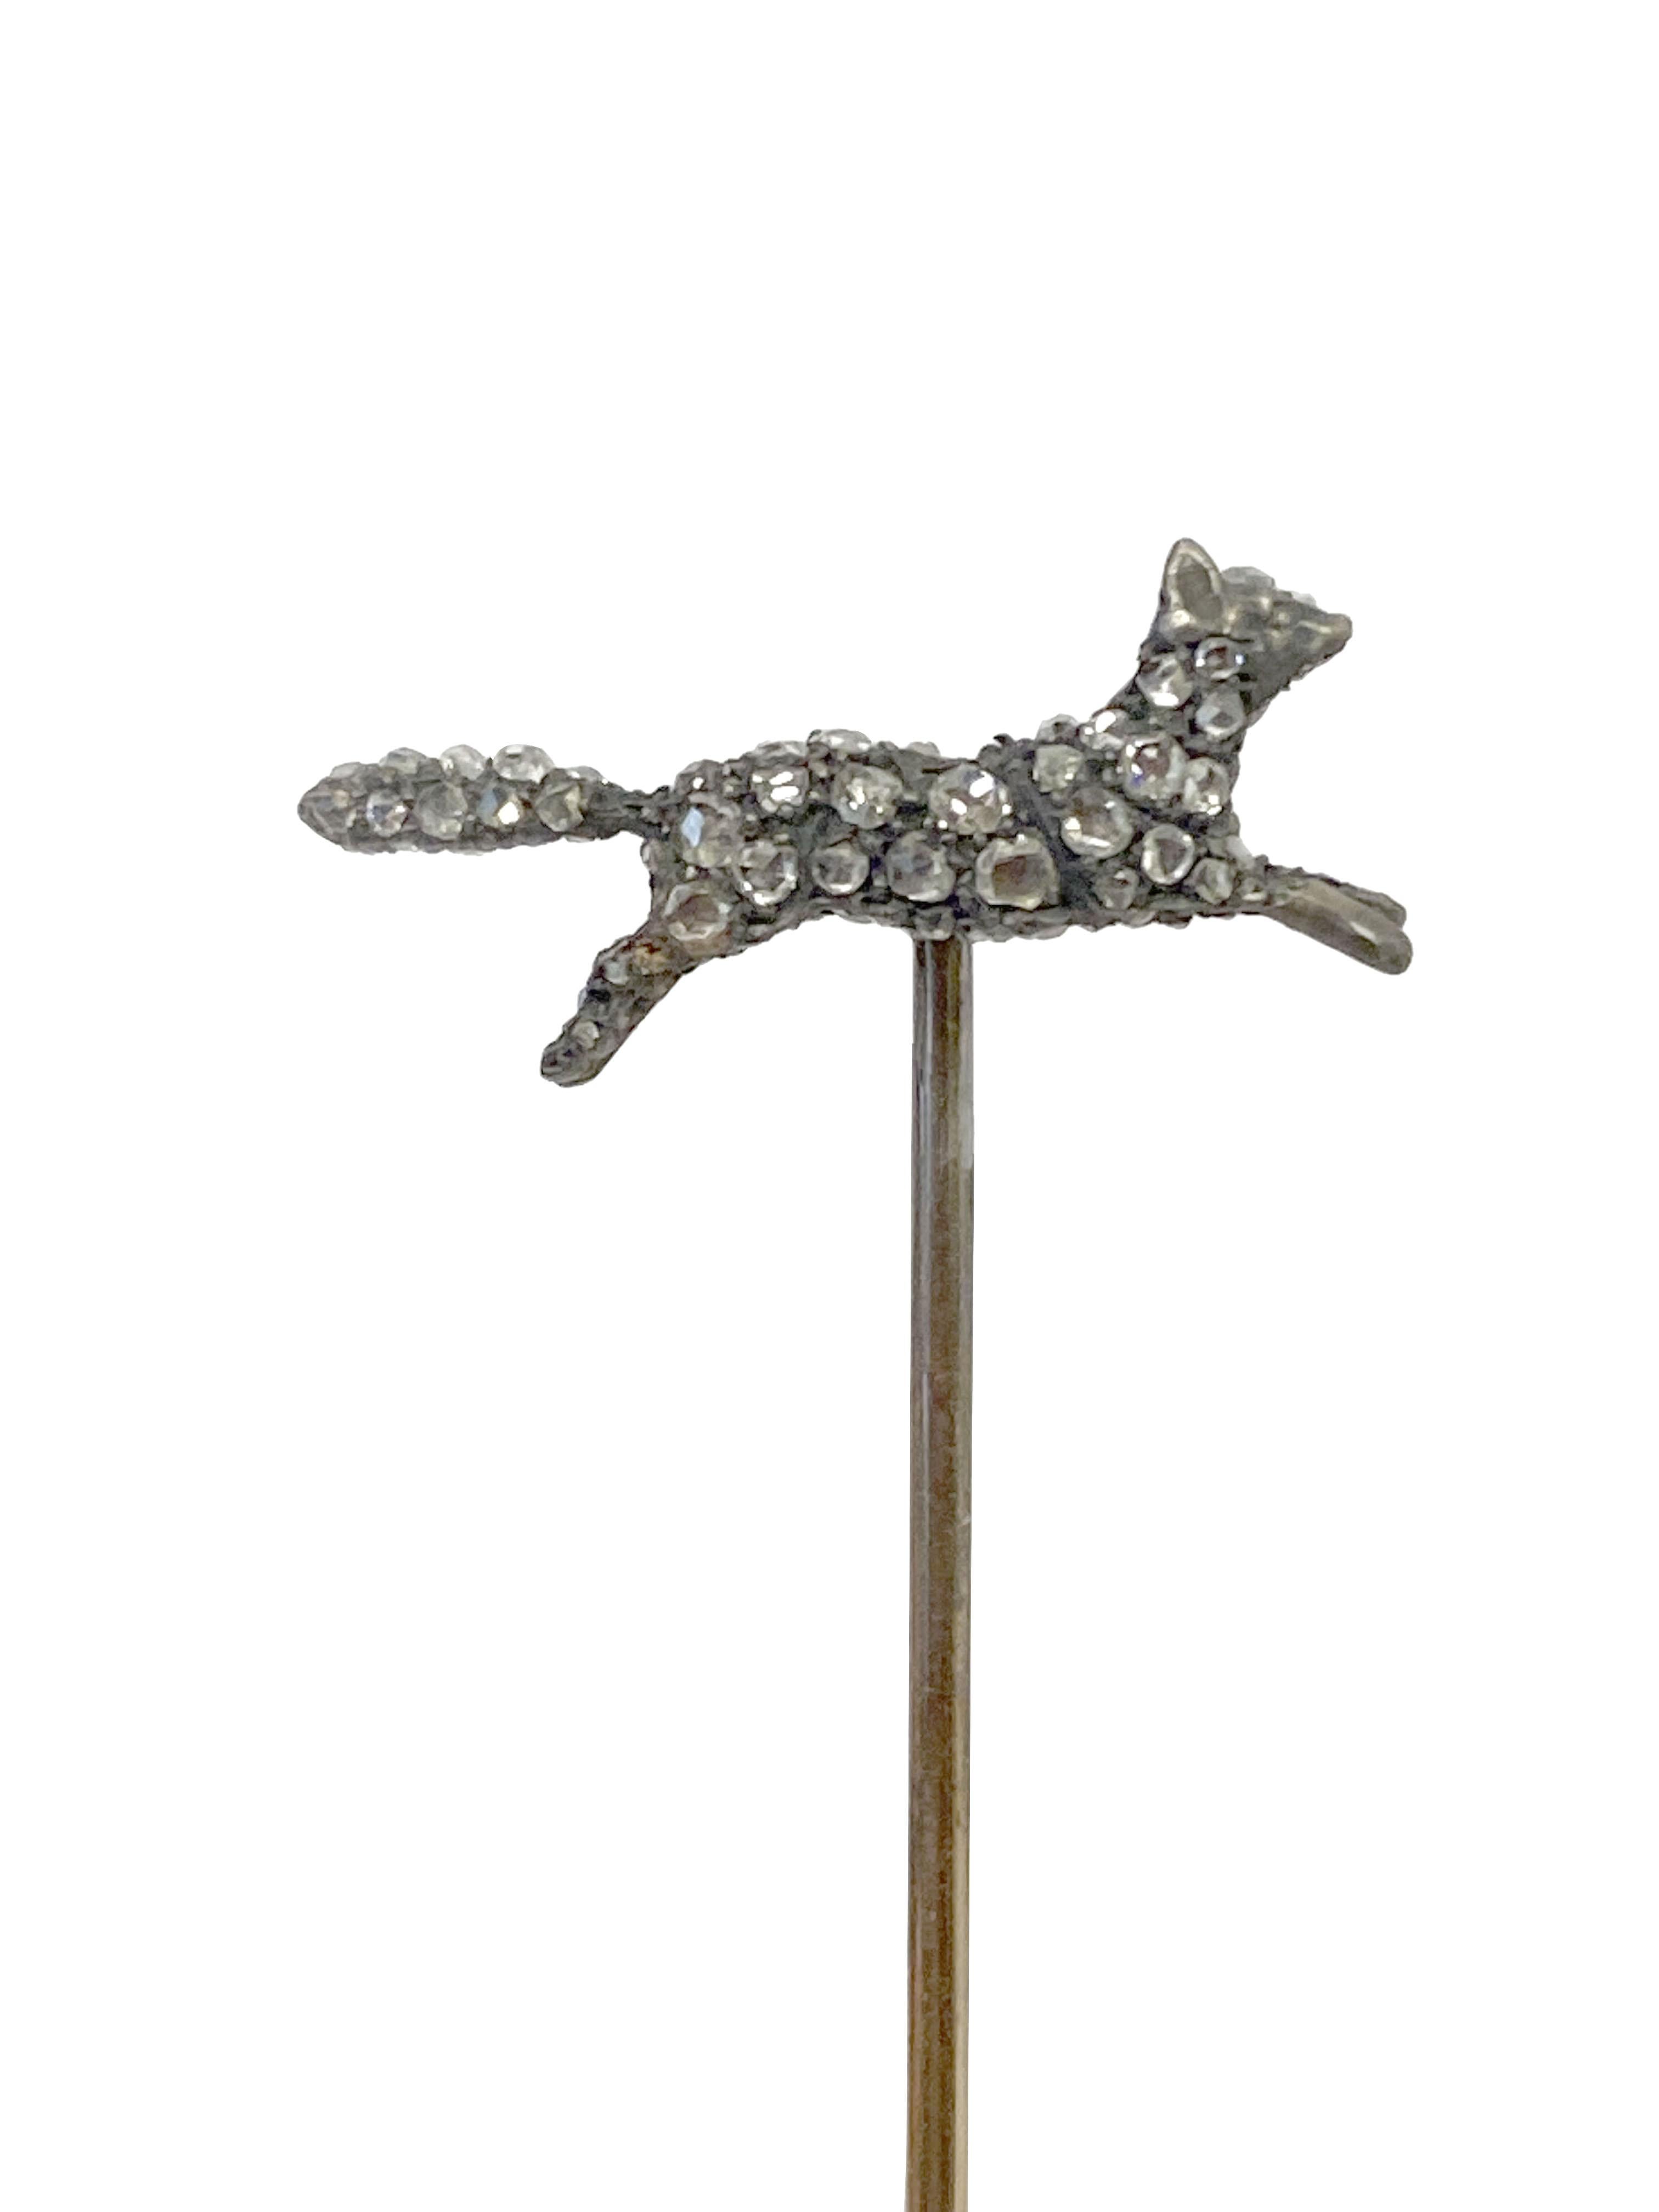 Circa 1900 Tiffany & Company 2 sided Fox Stick Pin, the Fox measures 3/4 inch in length is Silver and is set with Rose cut Diamonds on both sides, Yellow gold pin measuring 2 5/8 inches in length. 